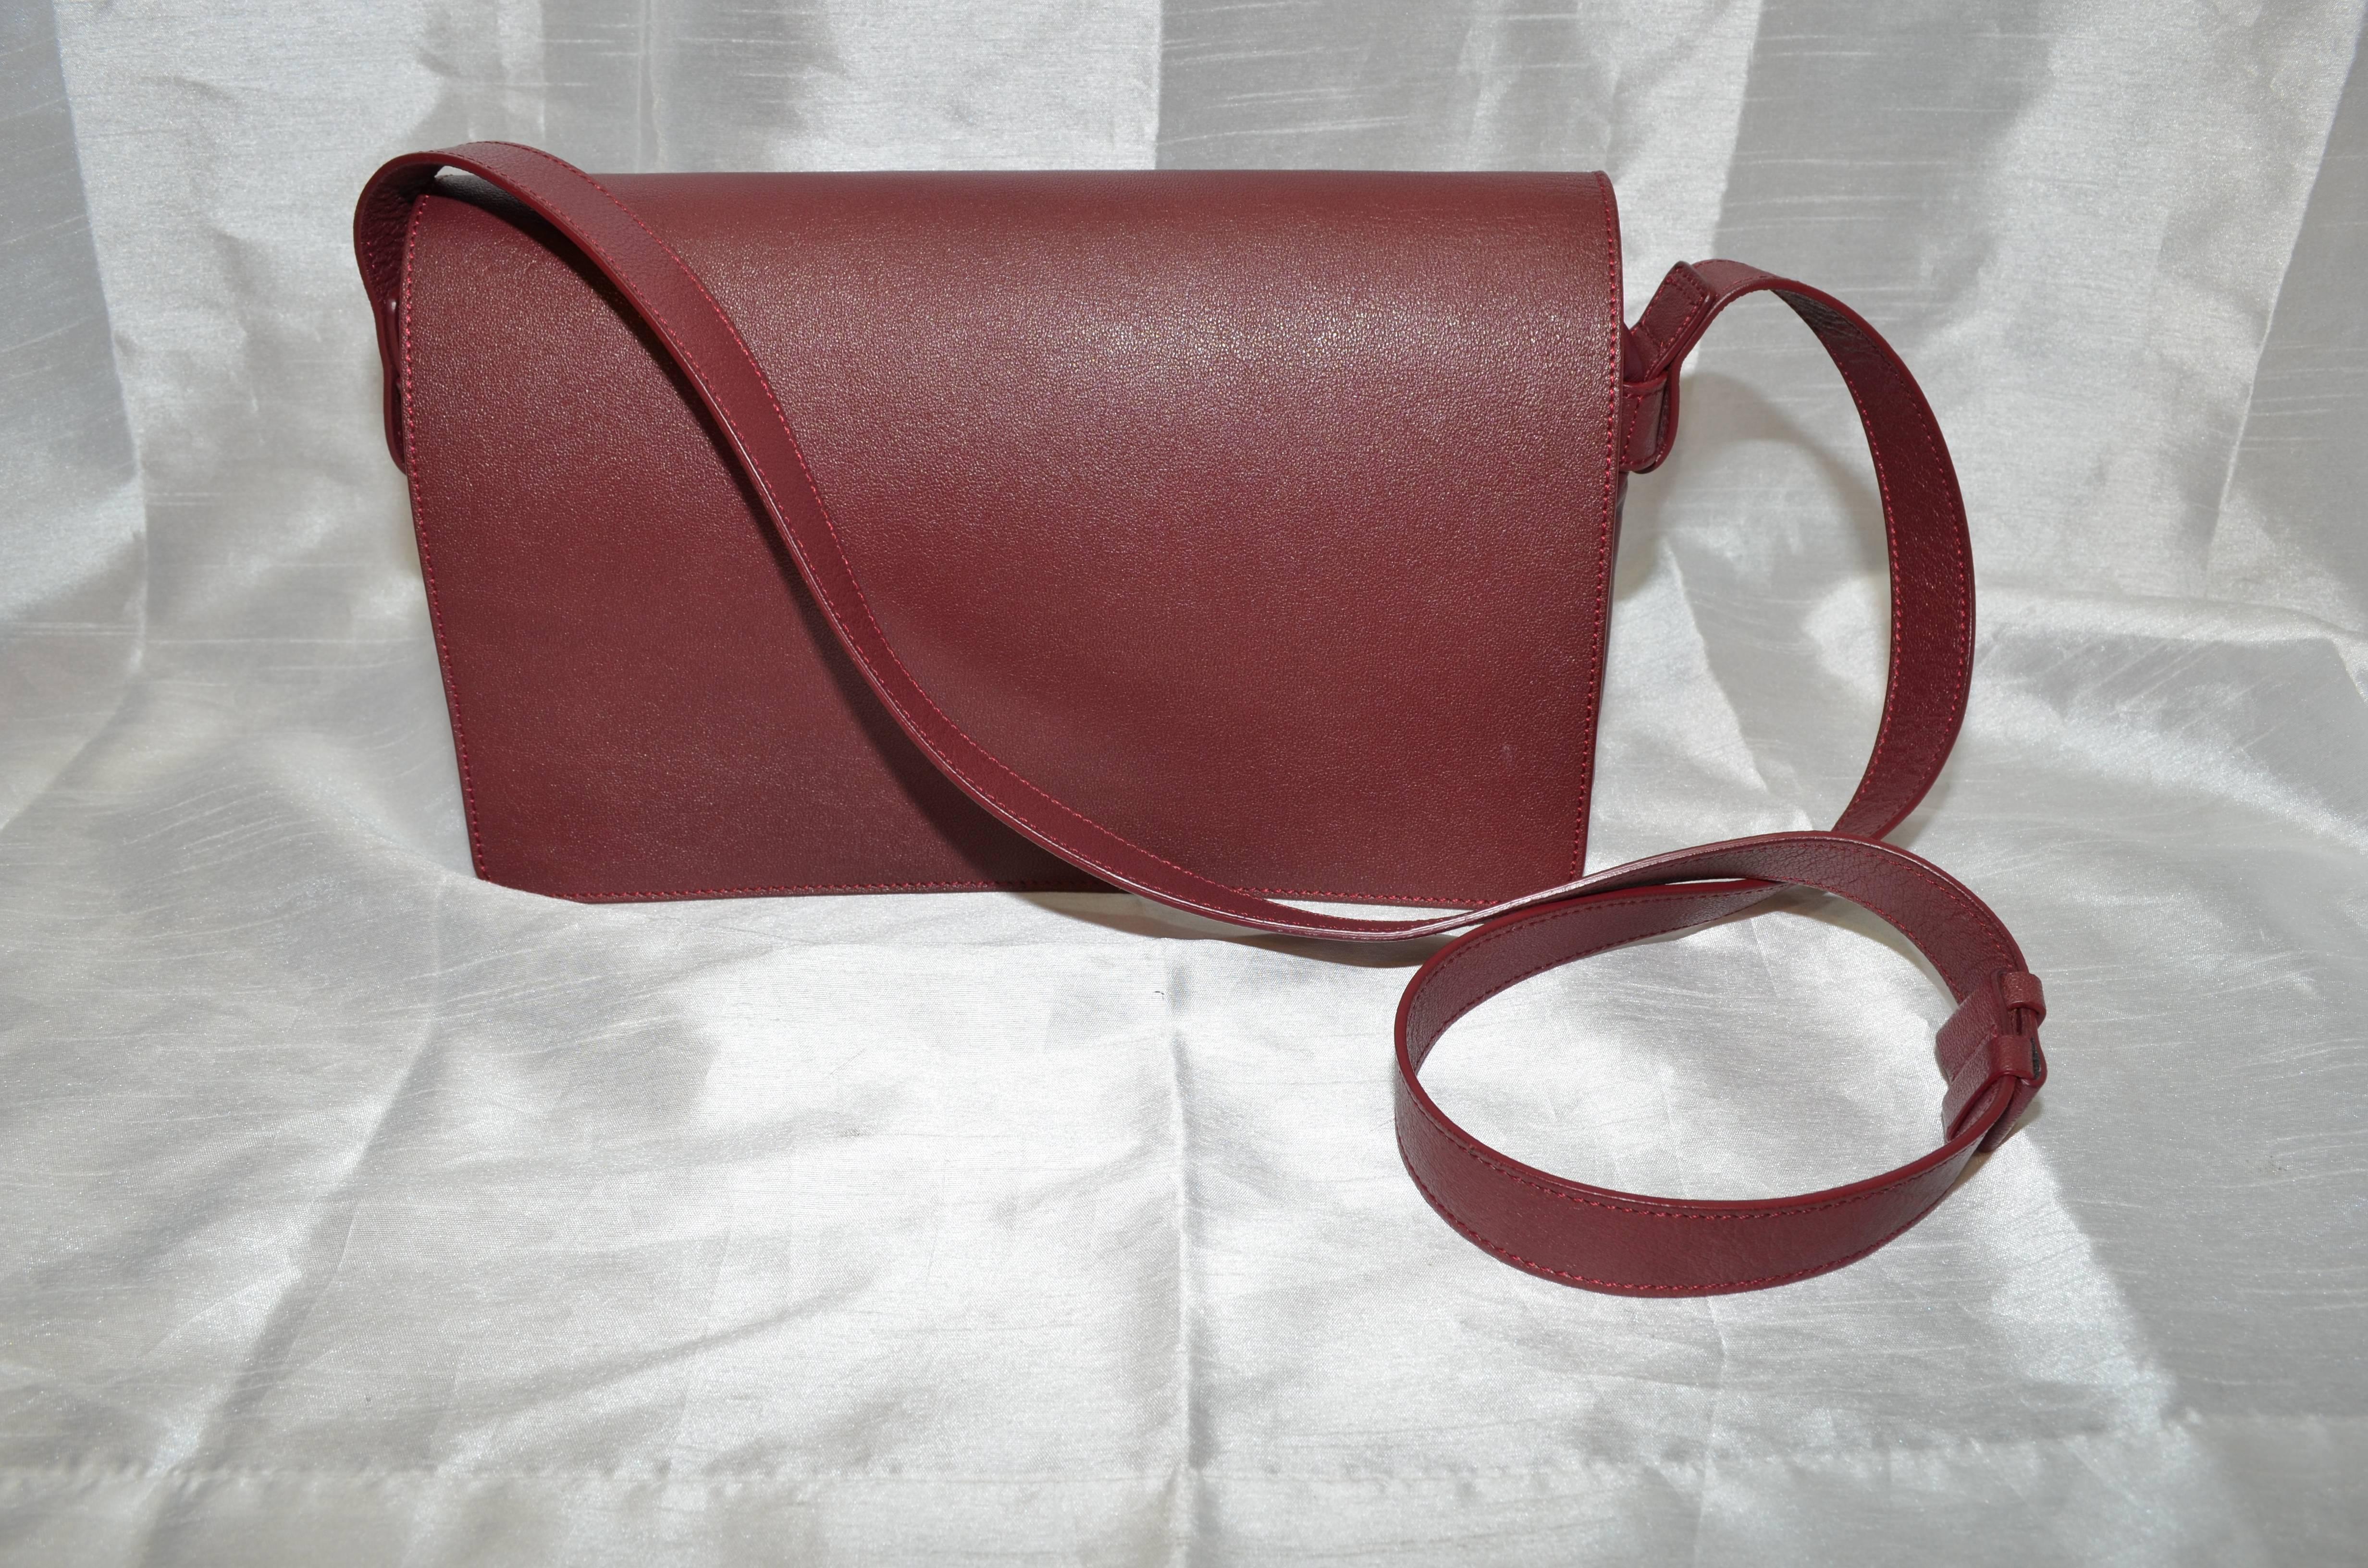 Margiela bag is featured in maroon leather with a flat shoulder strap, exposed stitches for a label on the back side. Structured outer-shell with a relaxed zip top center compartment, flap front with a snap stud closure, and one pocket underneath